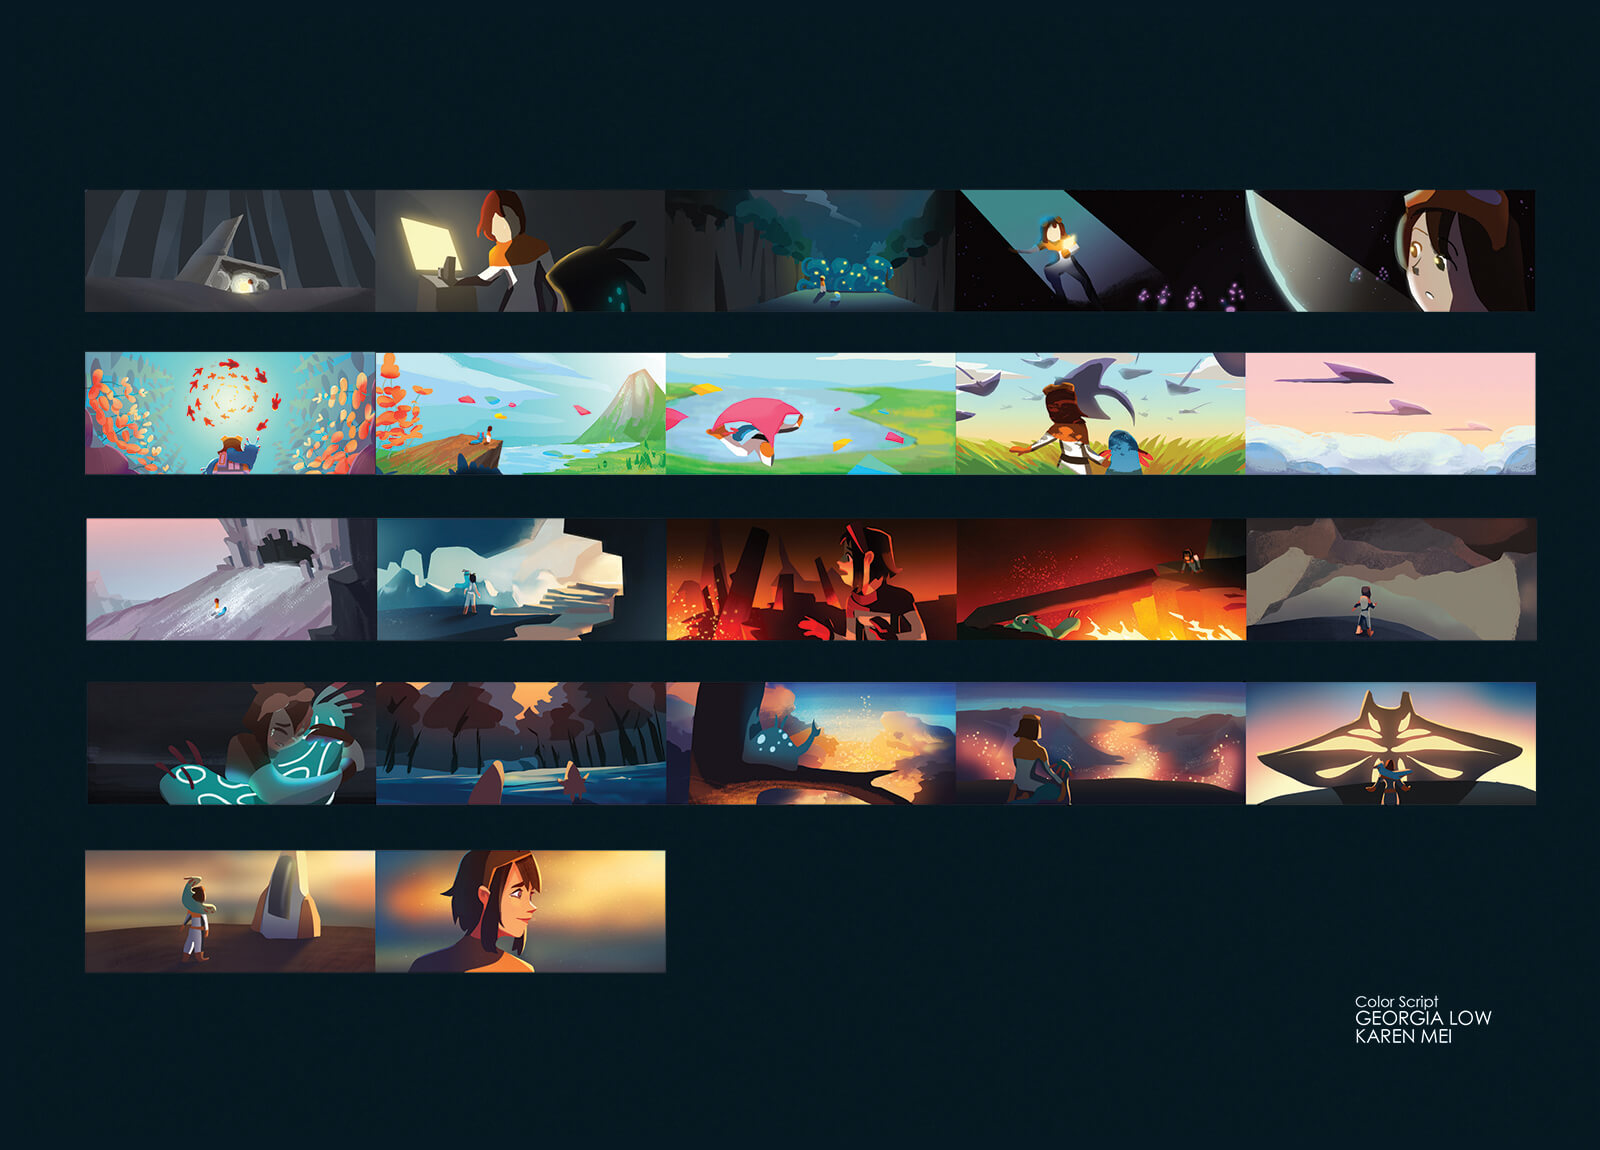 Color script by Georgia Low and Karen Mei showing various scenes from The Way Home animation.